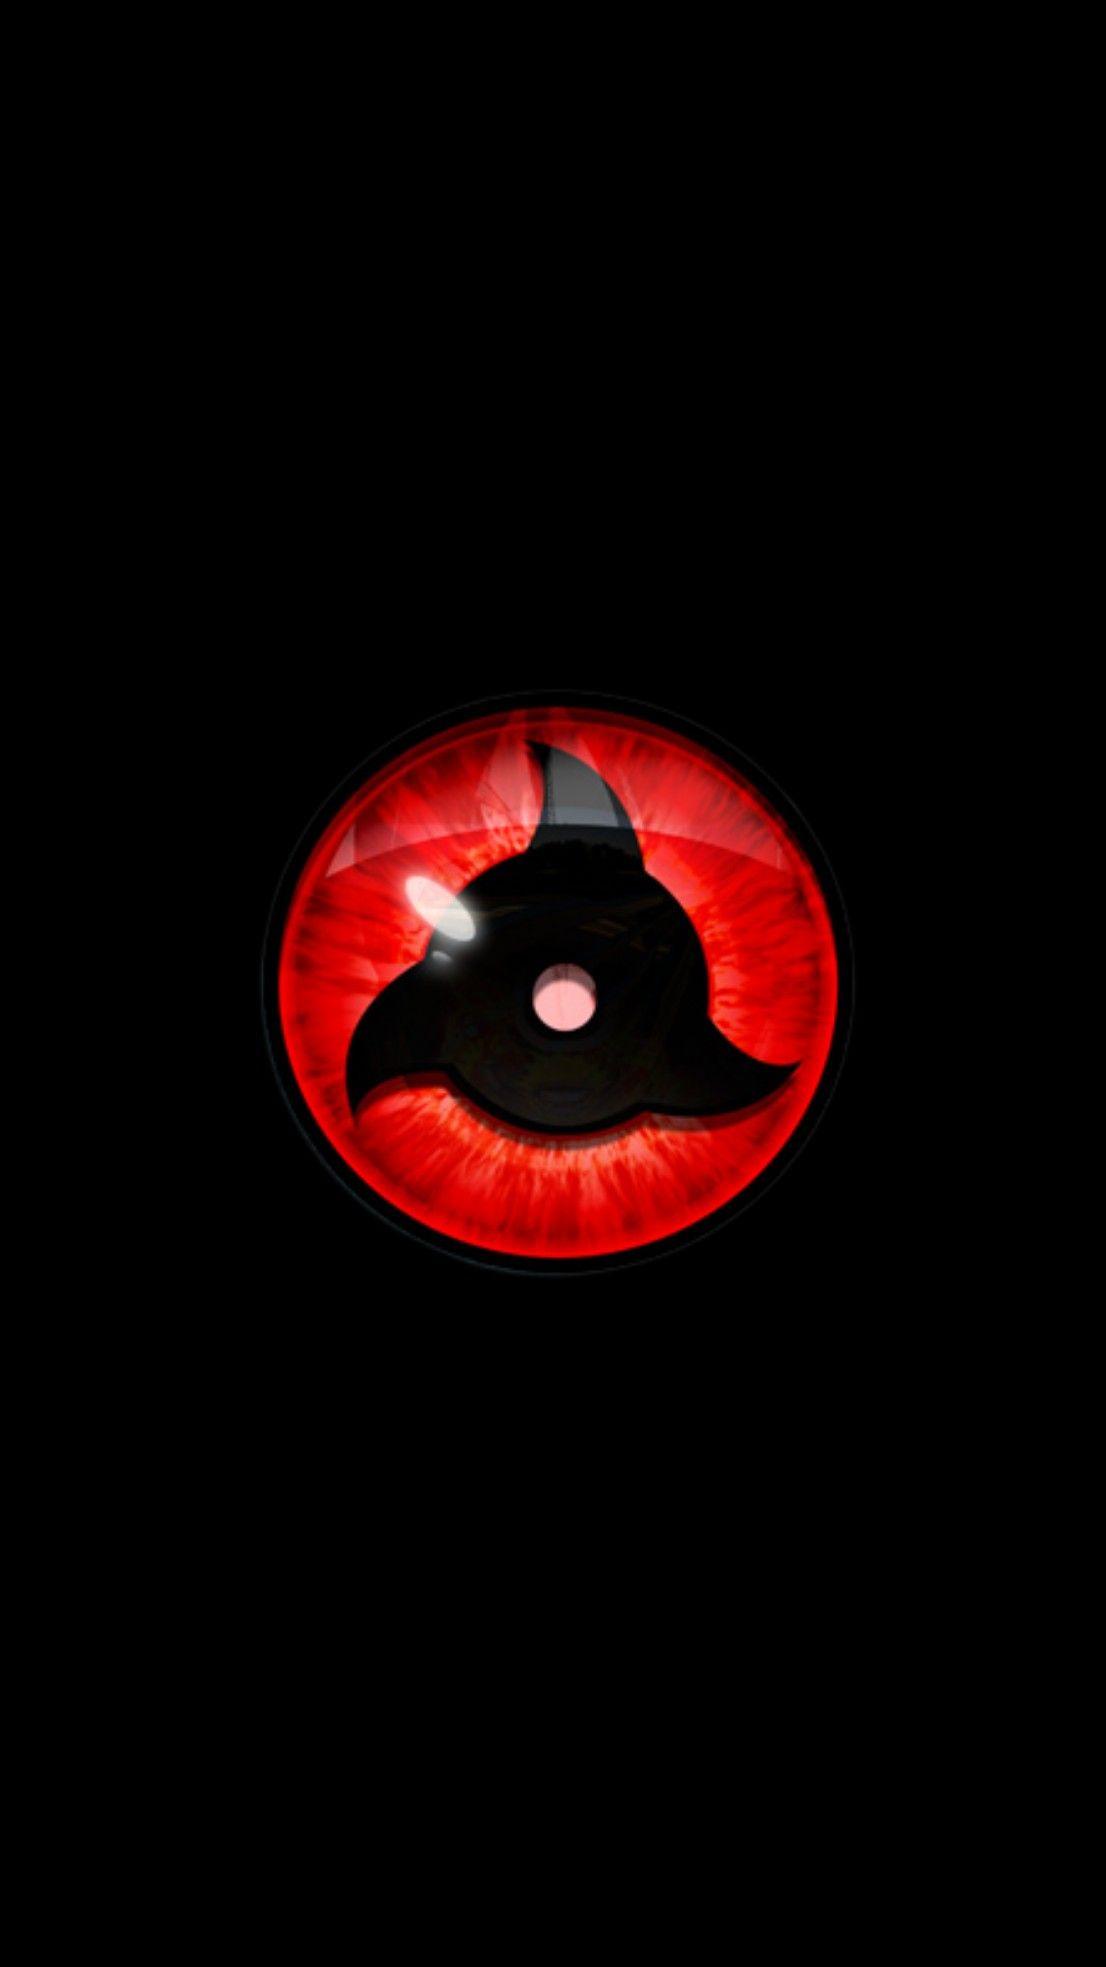 Anime Eyes Android Wallpapers - Wallpaper Cave